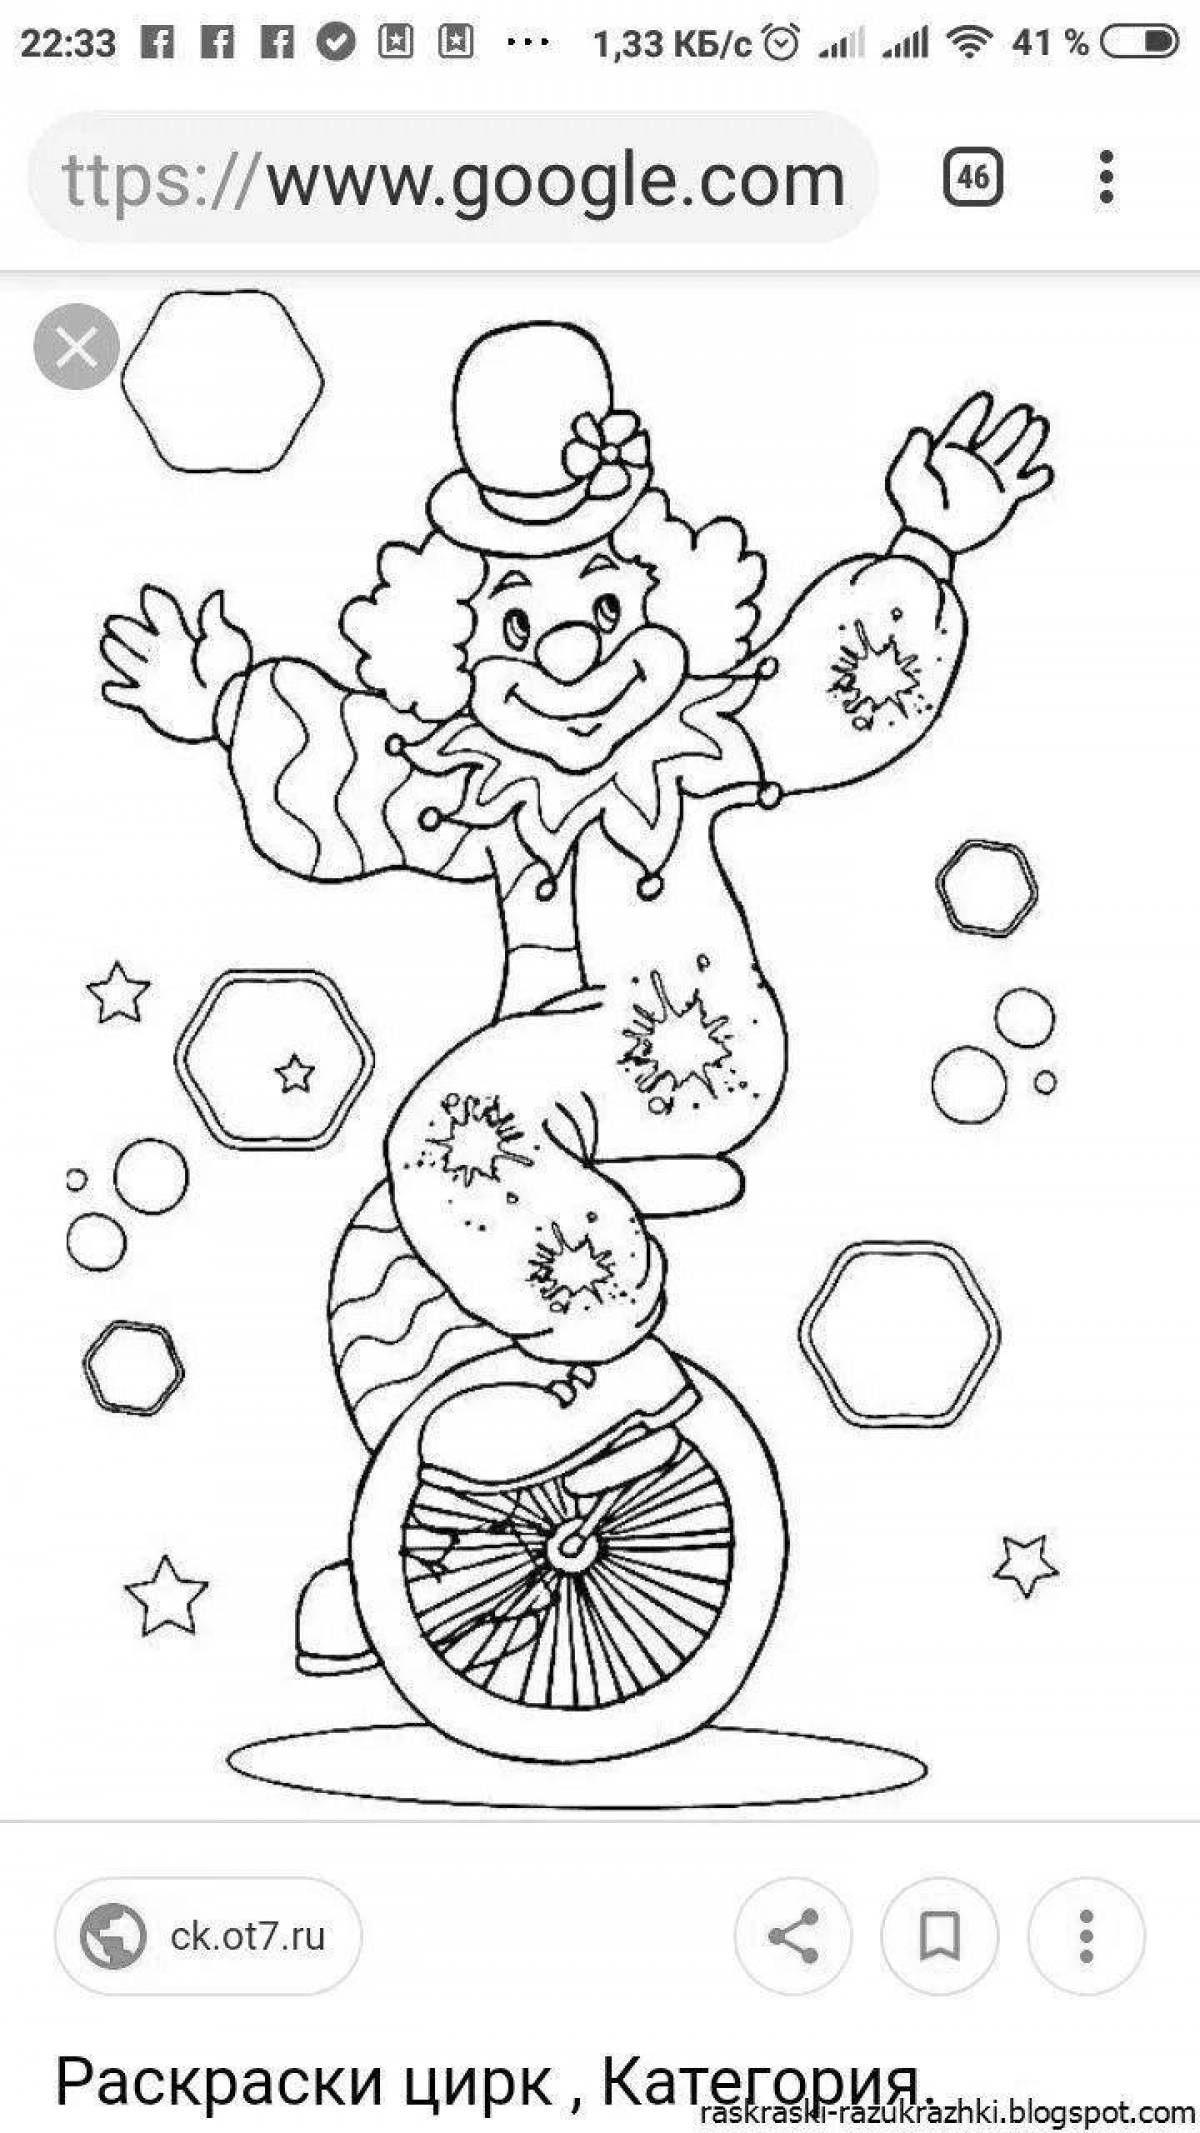 Adorable circus coloring book for kids